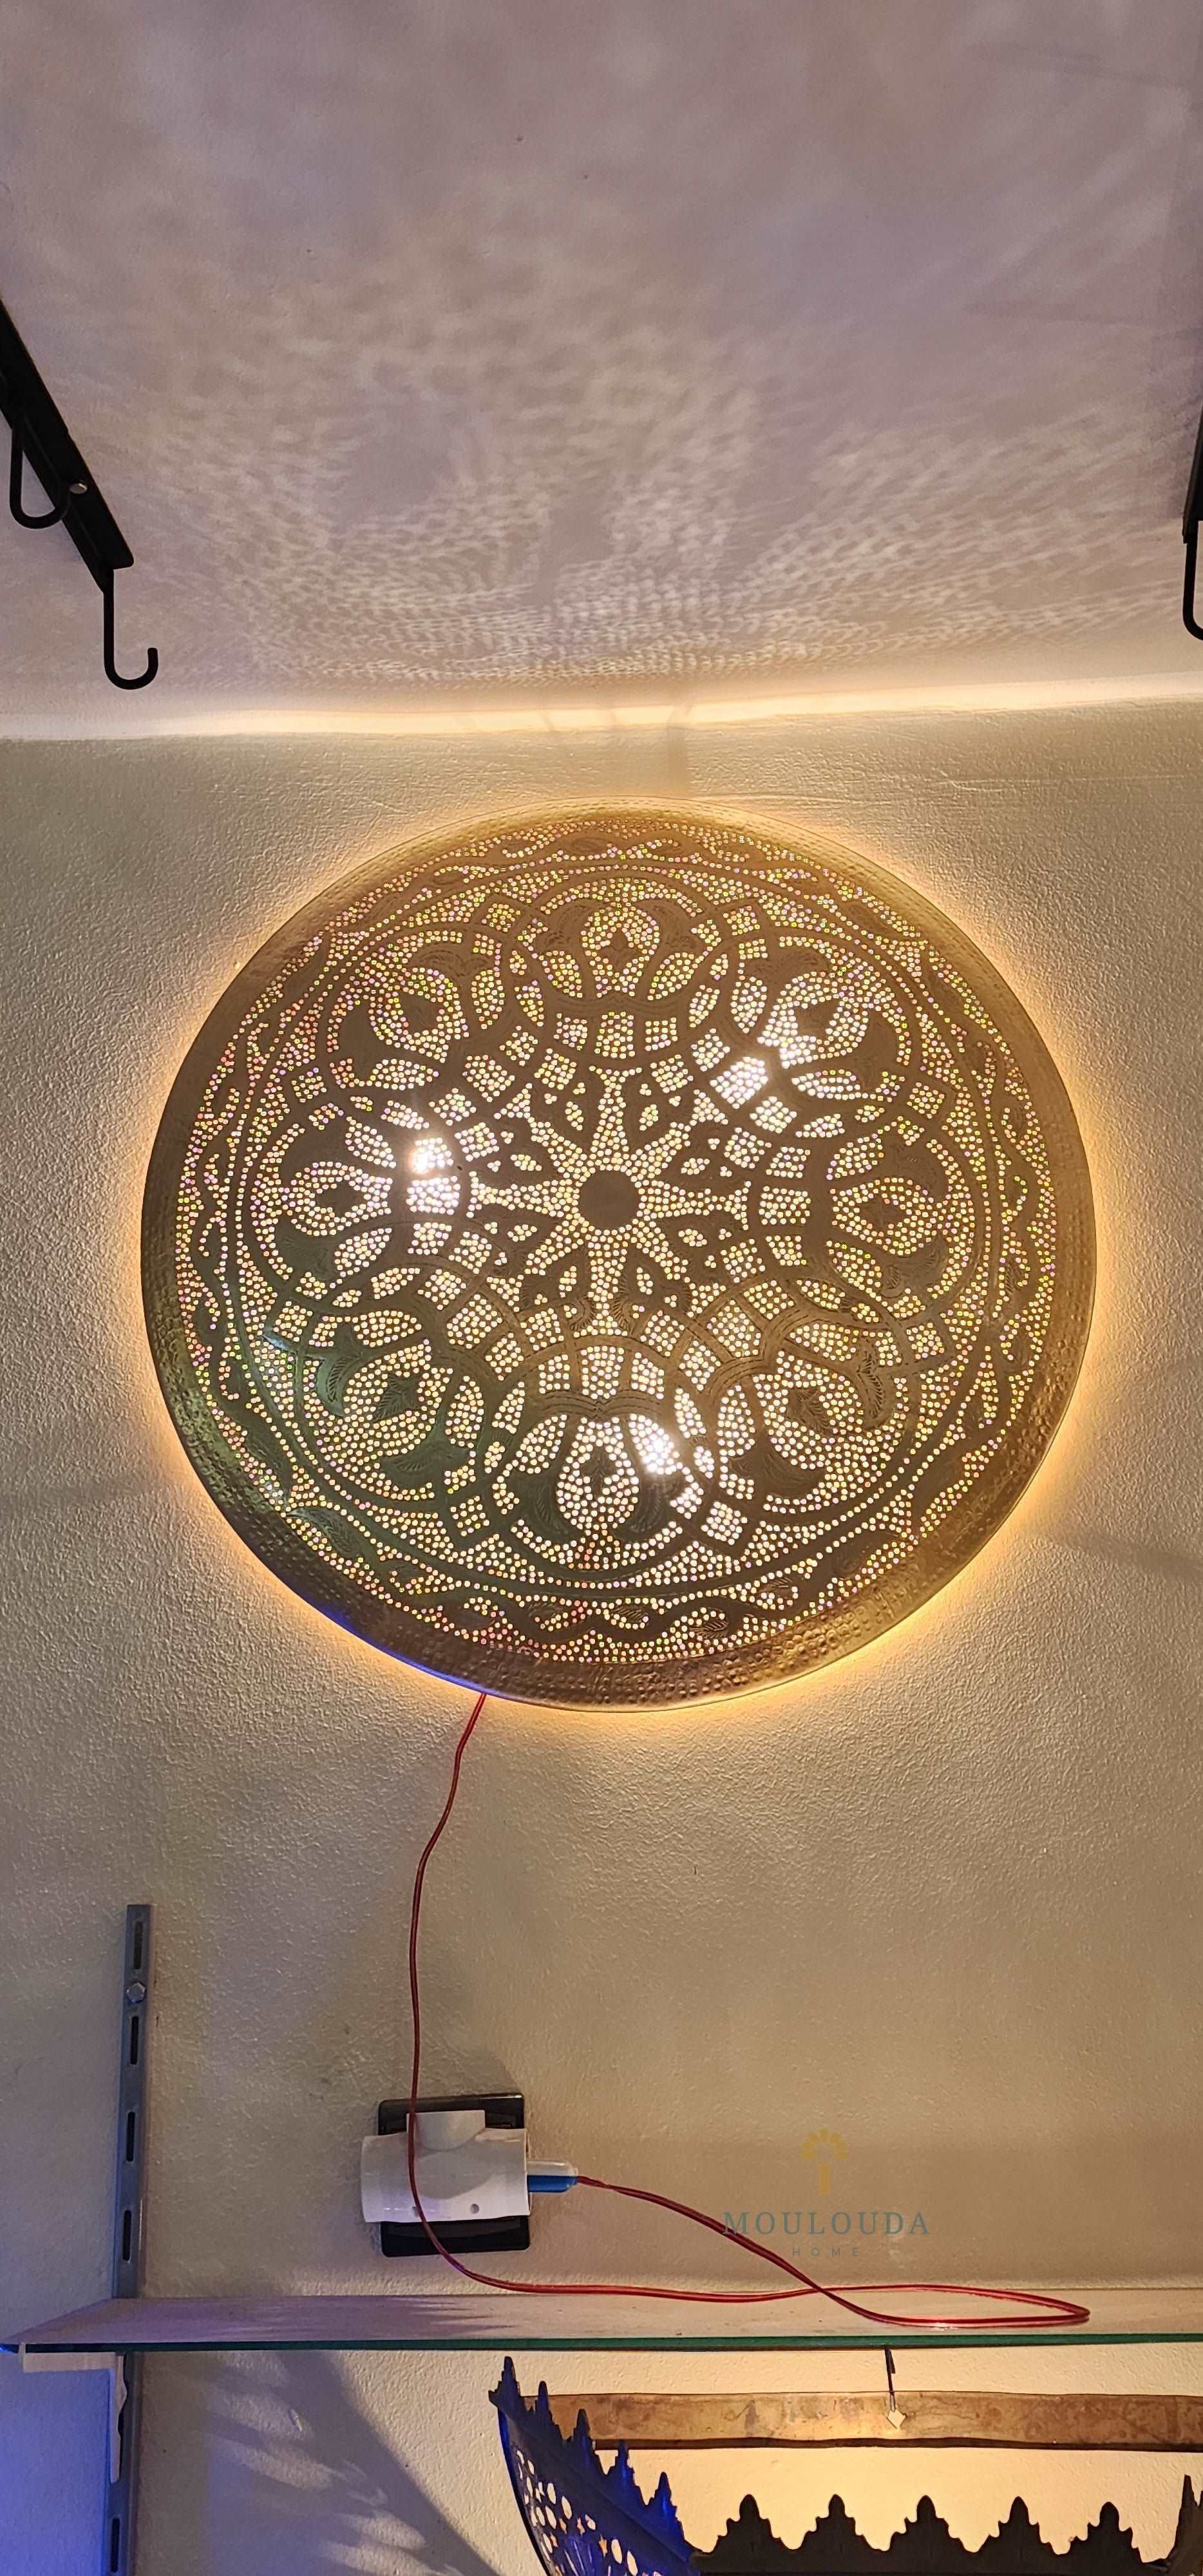 Designer Moroccan Wall Sconce - Add Boho Chic to Your Wall Decor - Mouloudahome